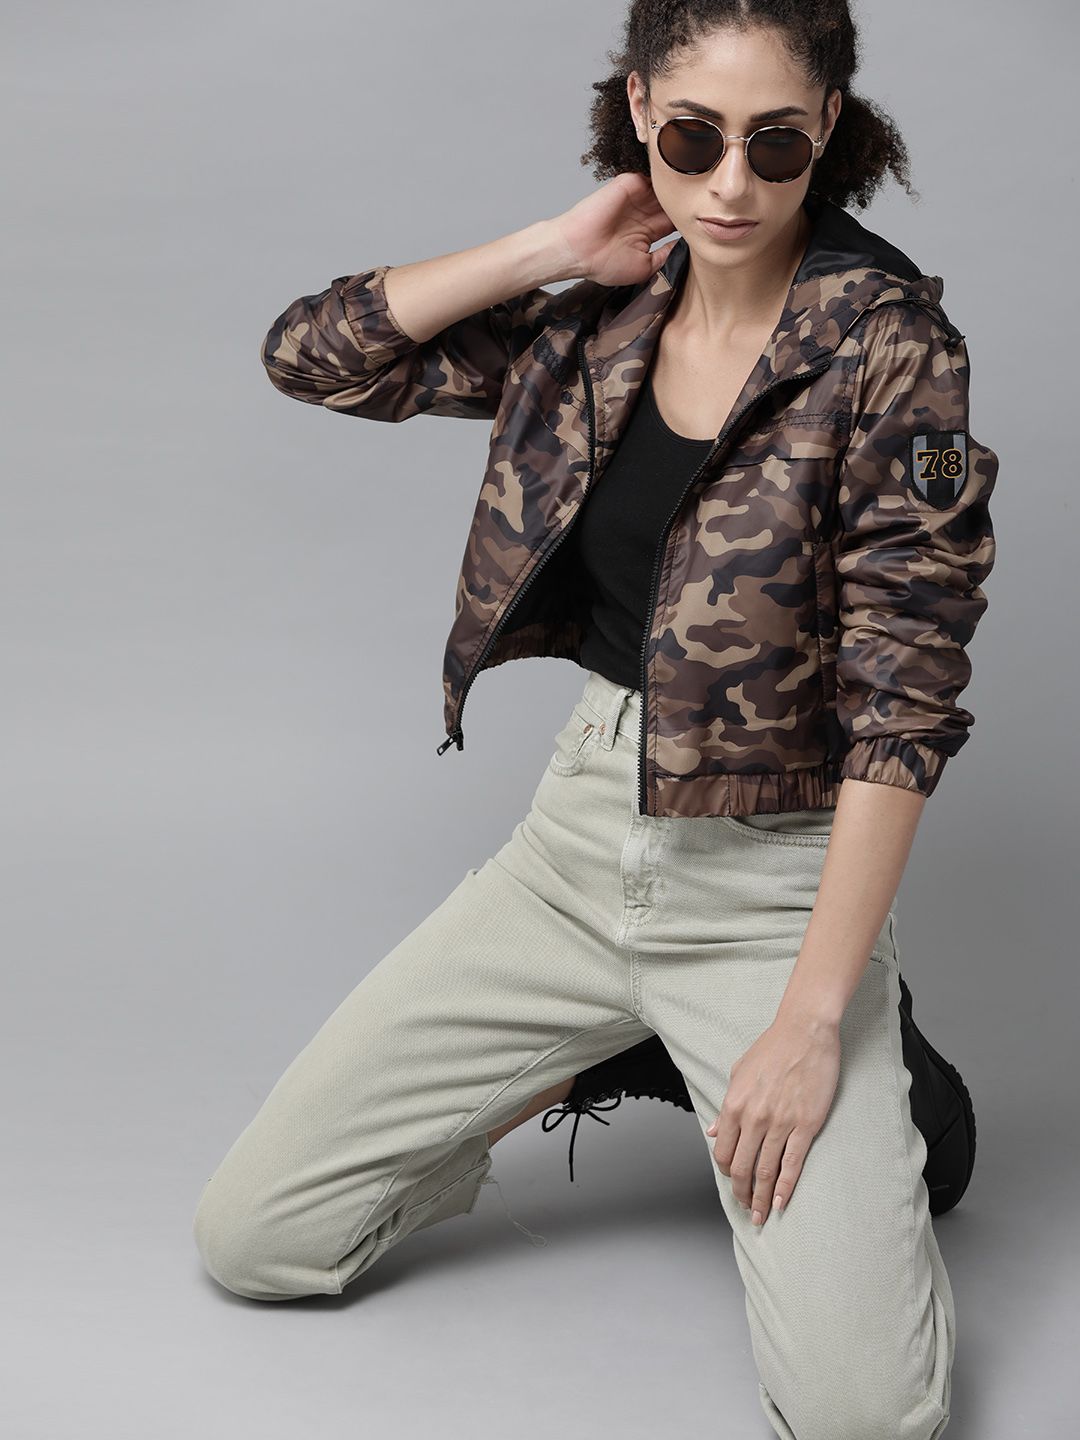 Roadster Women Olive Green & Black Camouflage Printed Tailored Jacket Price in India